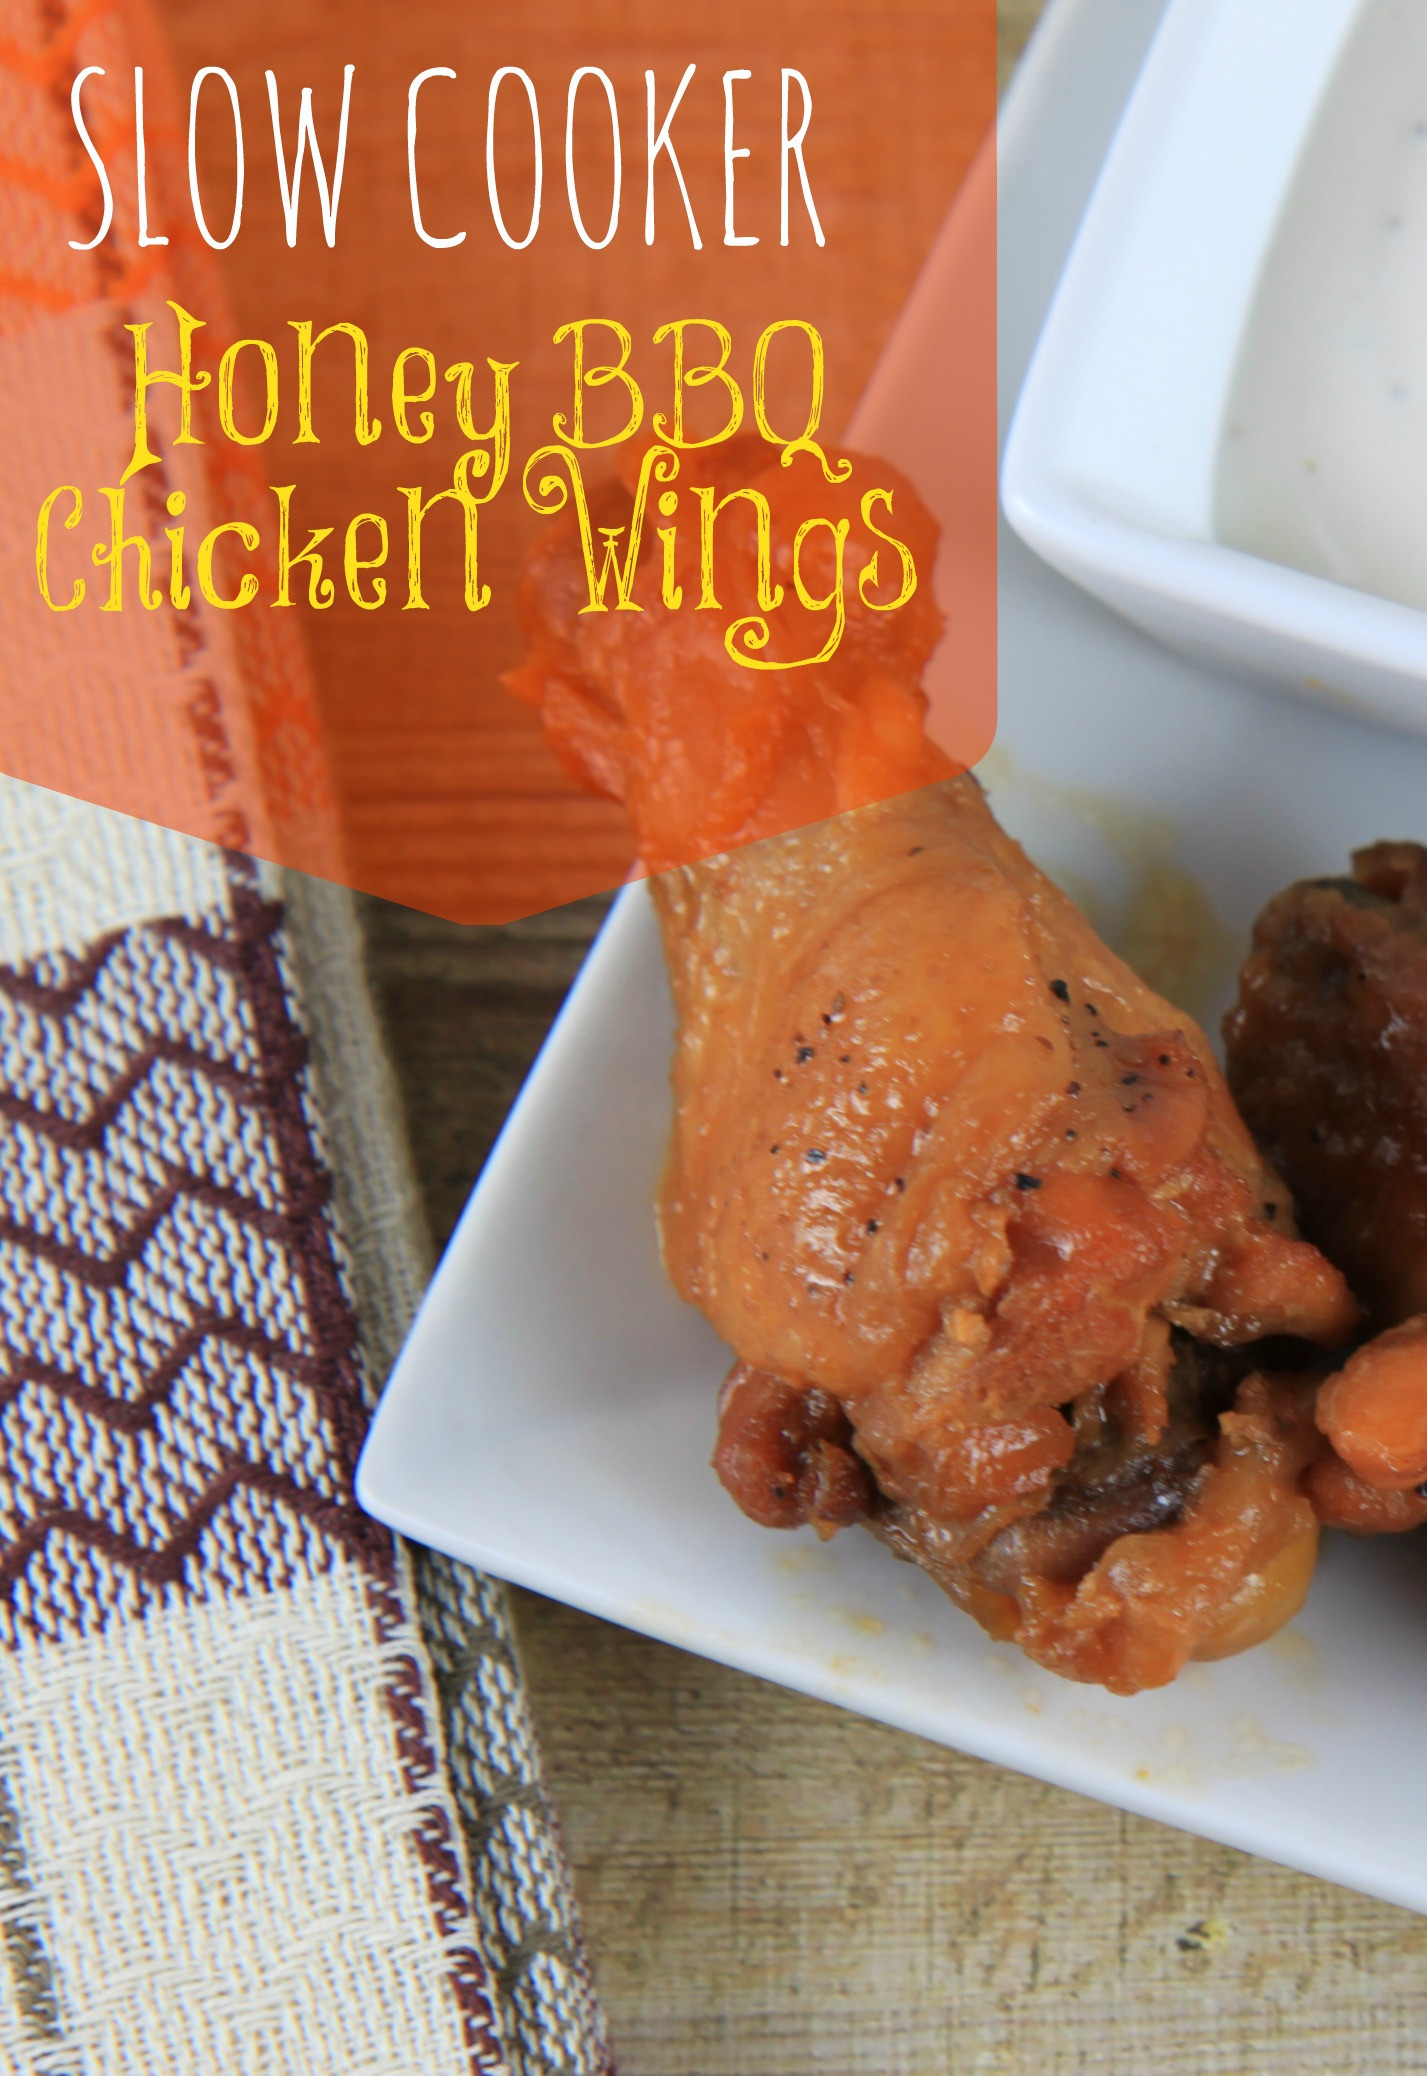 Easy Slow Cooker Chicken Wings Recipe
 Slow Cooker Honey BBQ Chicken Wings BargainBriana